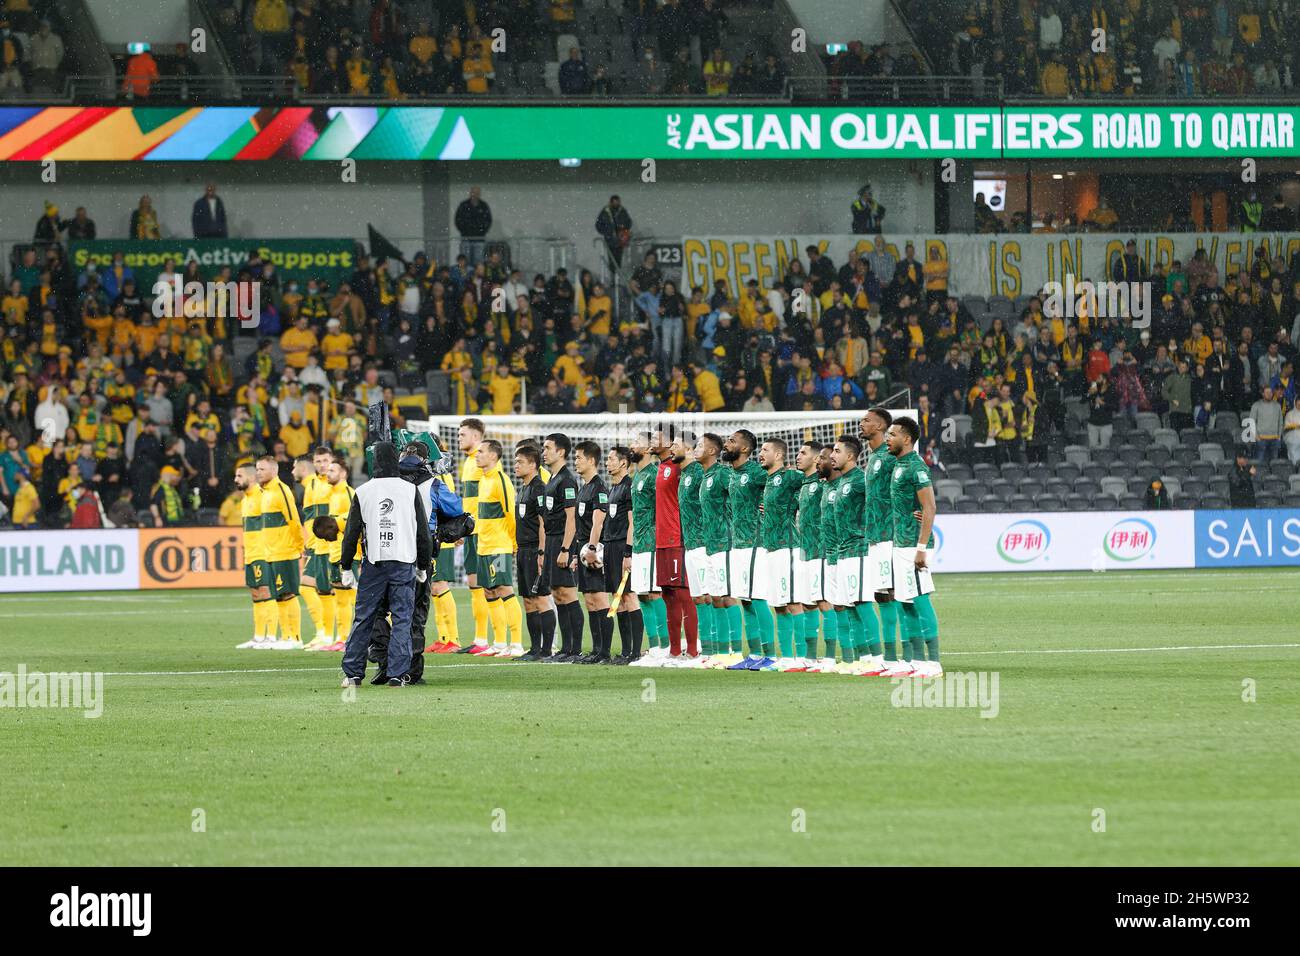 Sydney, Australia. 11th Nov, 2021. Both teams wait to sing the national anthem during the FIFA World Cup AFC Asian Qualifier match between the Australia Socceroos and Saudi Arabia at CommBank Stadium on November 11, 2021 in Sydney, Australia Credit: IOIO IMAGES/Alamy Live News Stock Photo